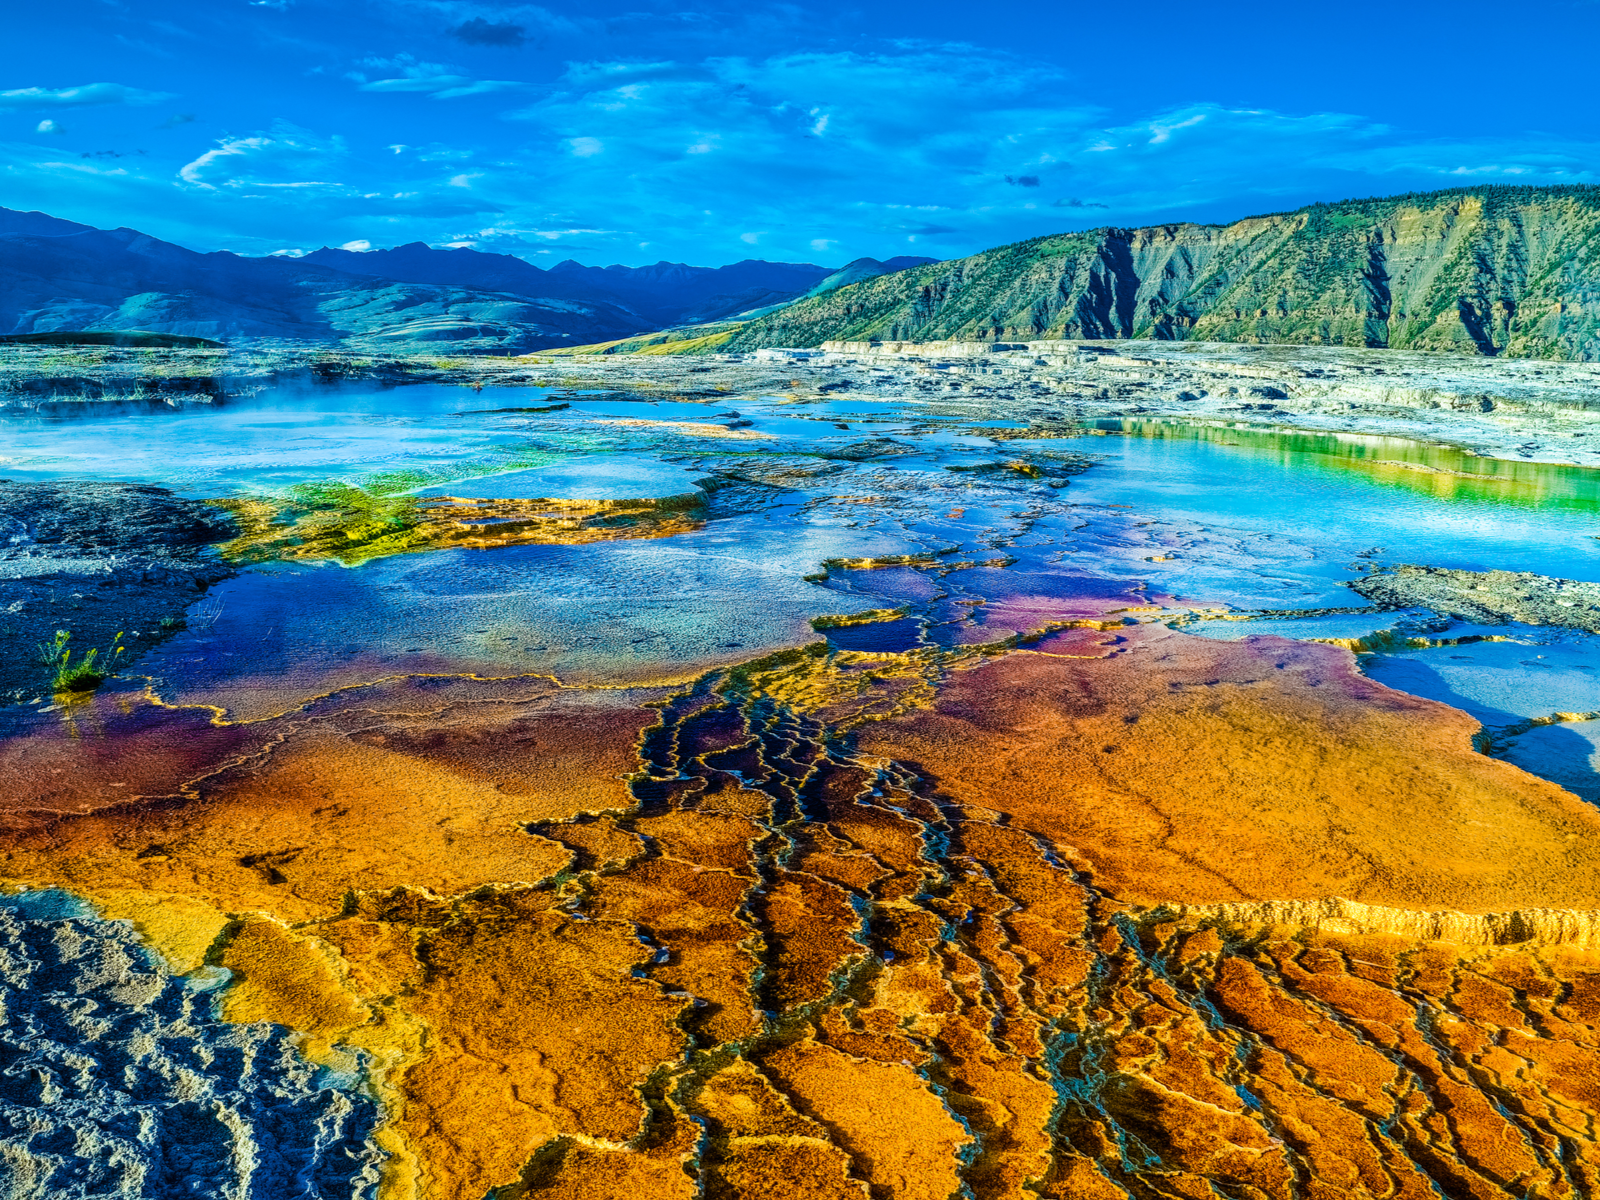 Mammoth Hot Springs pictured with gorgeous blue and orange water on a summer day